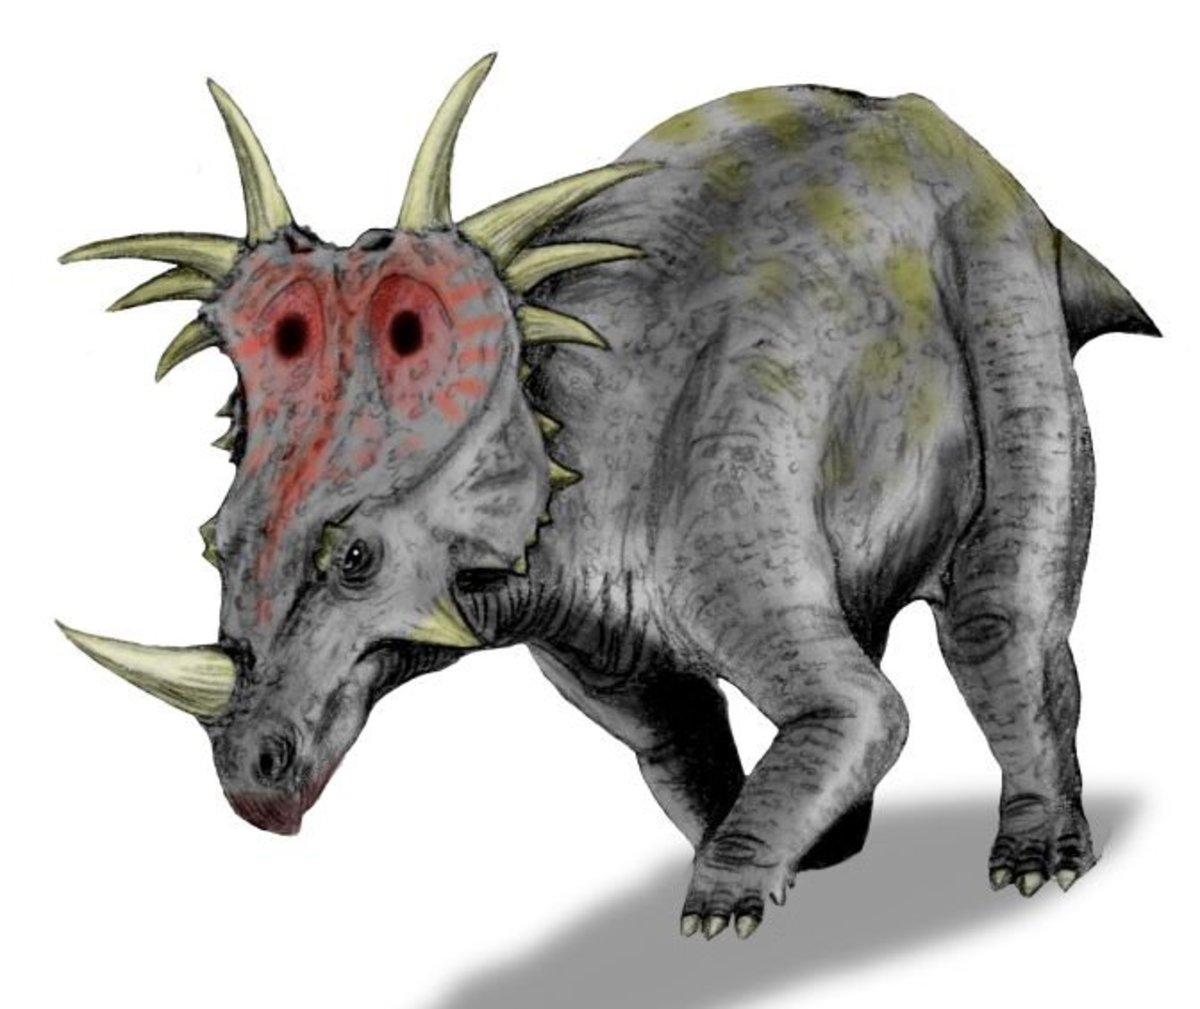 This is Styracosaurus, a ceratopsian dinosaur that matches the description of Ngoubou.